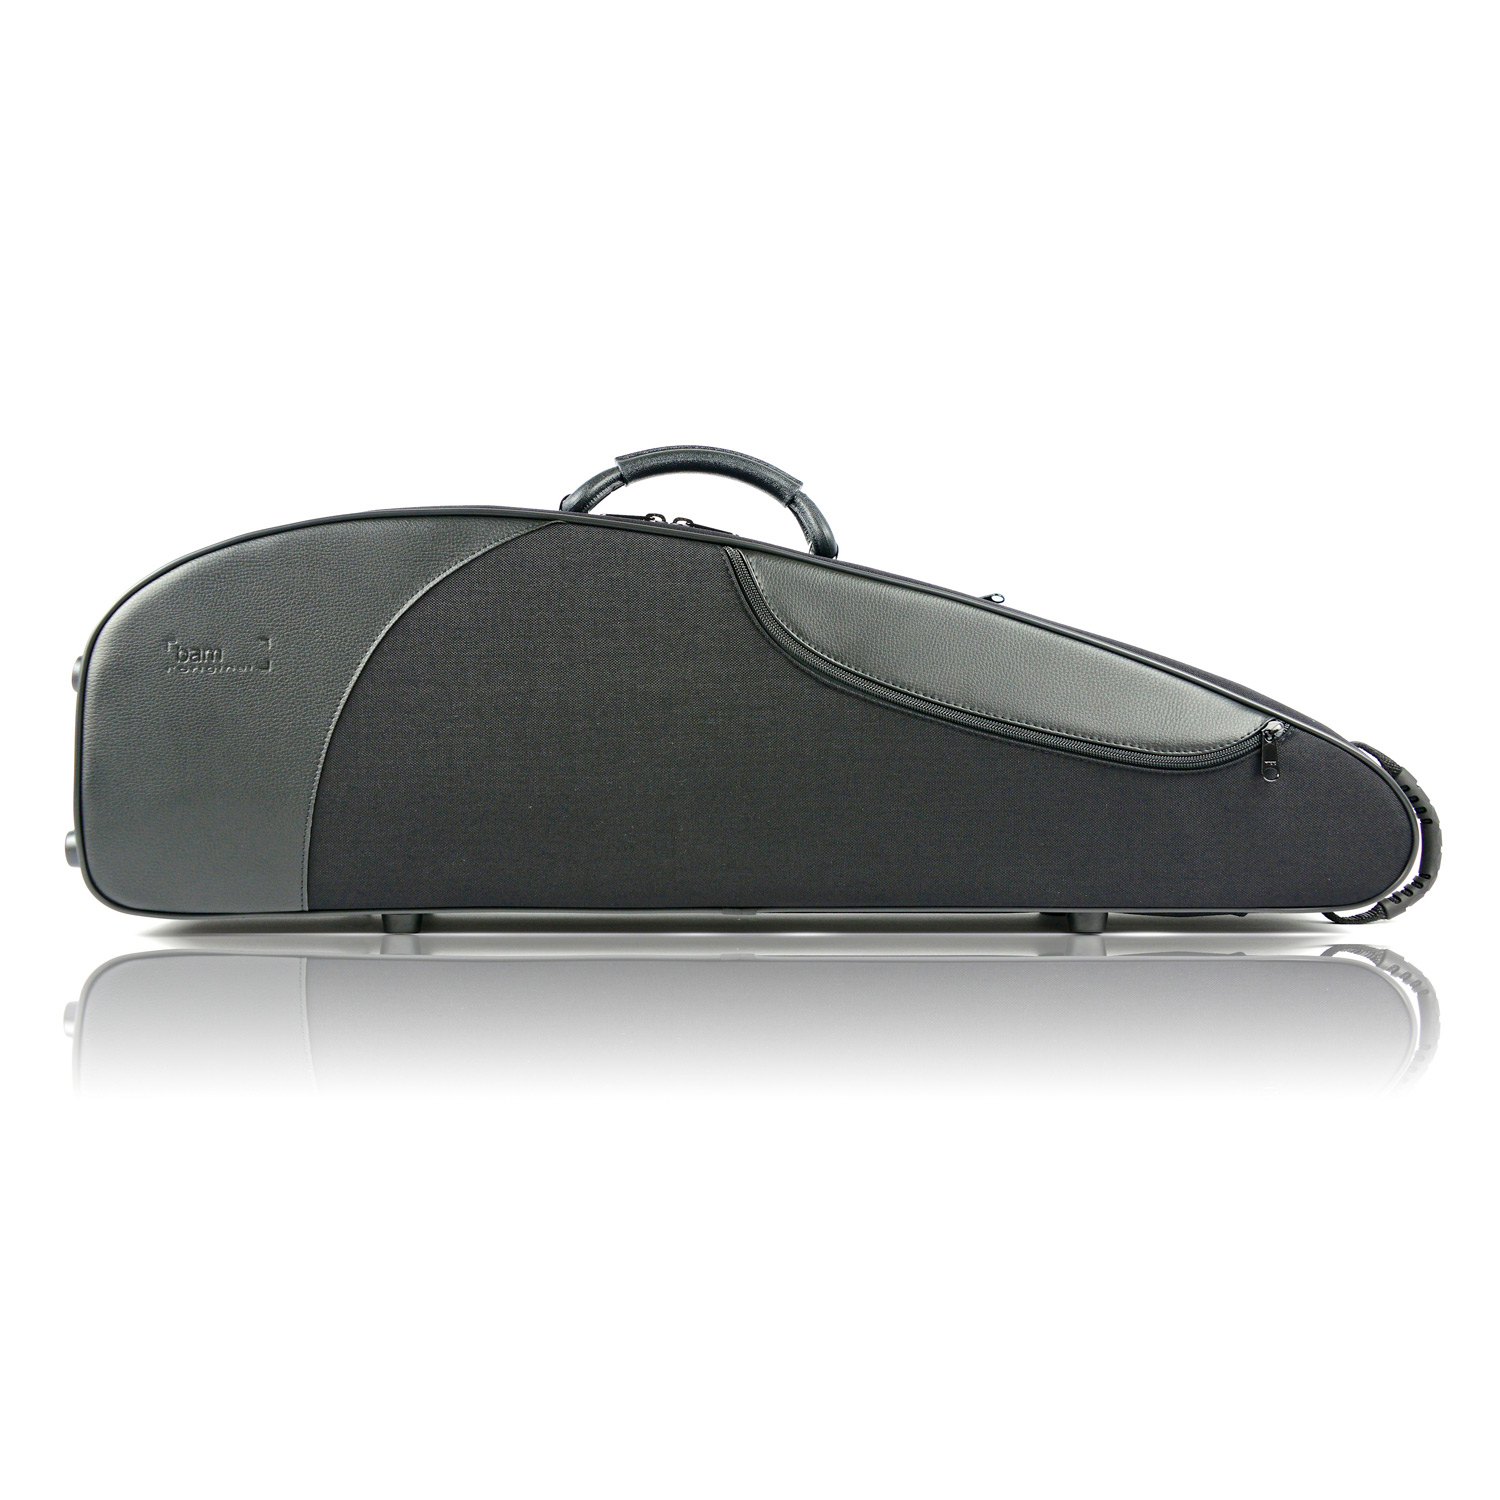 CLASSIC III violin case by BAM